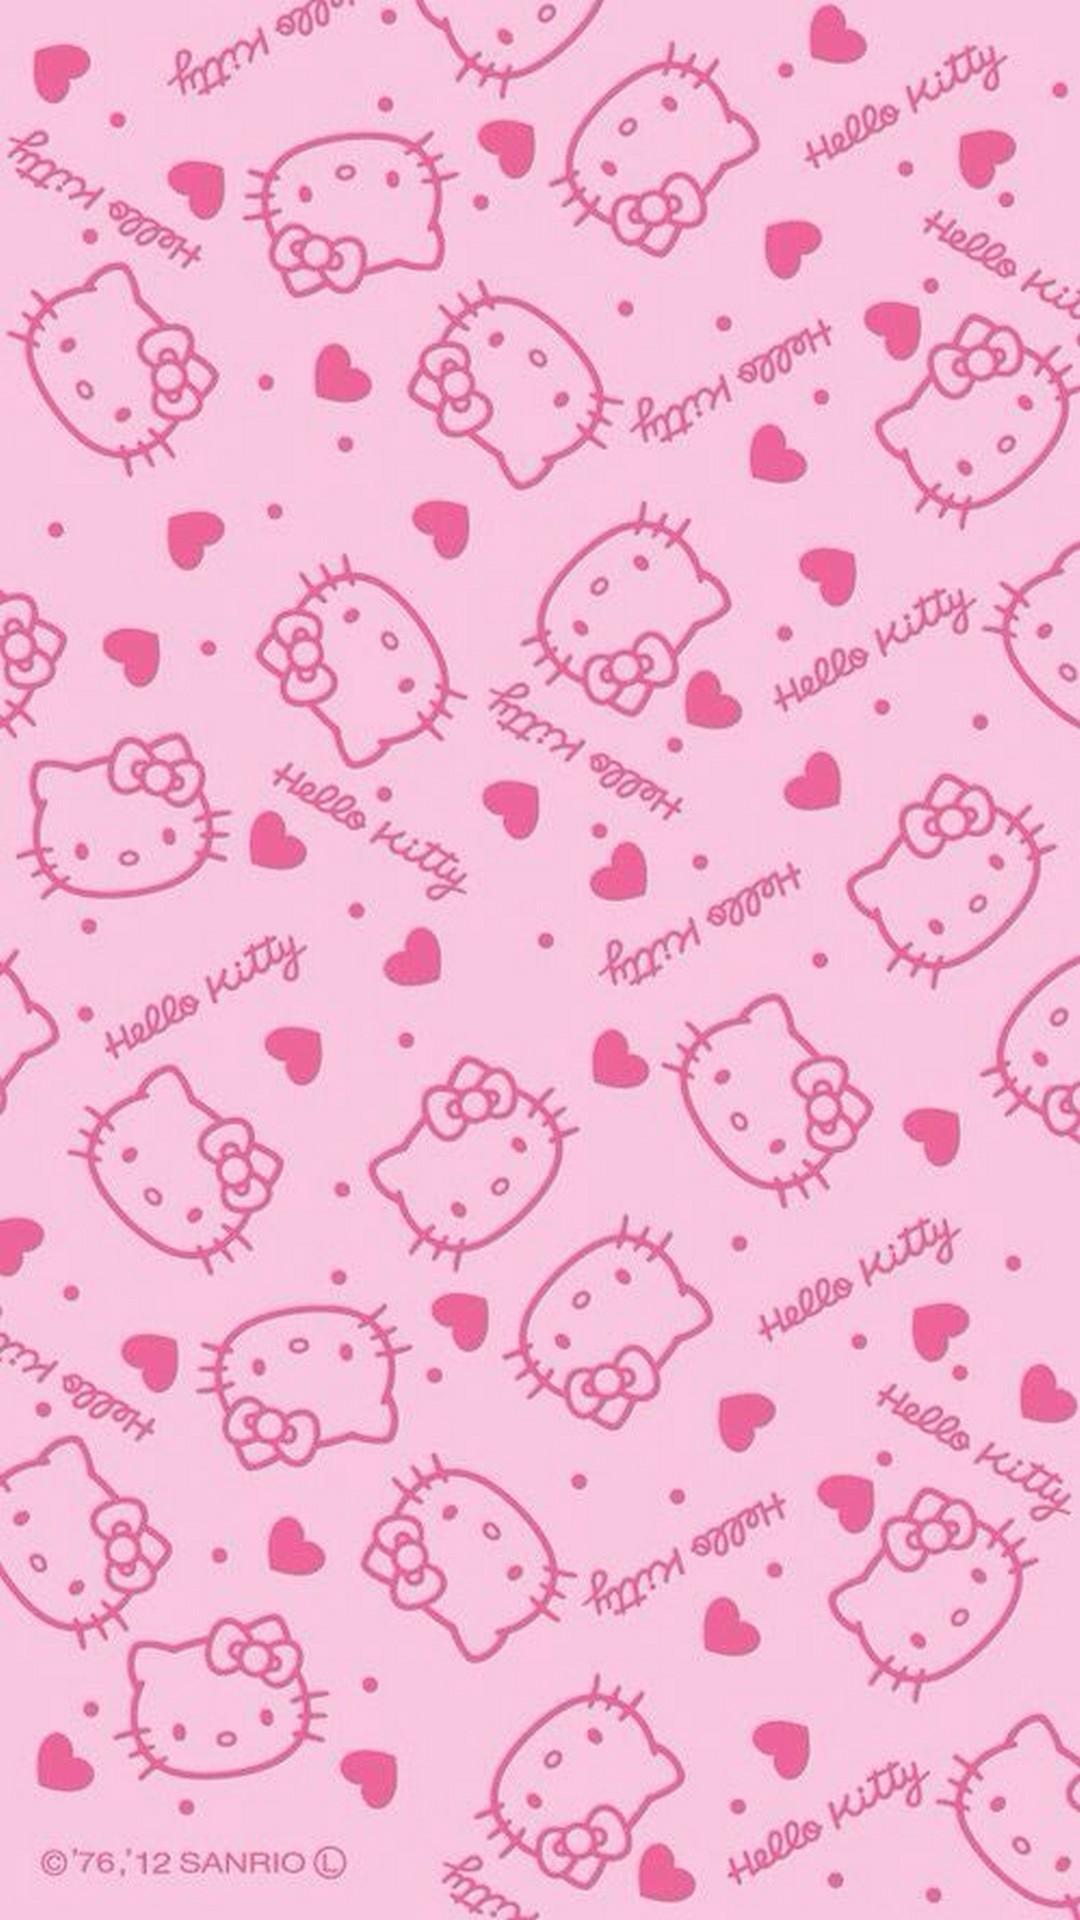 Super Cute Sanrio Wallpaper Ideas  Chococat  My Melody  Moon  Stars  Dusty Blue Background  Idea Wallpapers  iPhone WallpapersColor Schemes